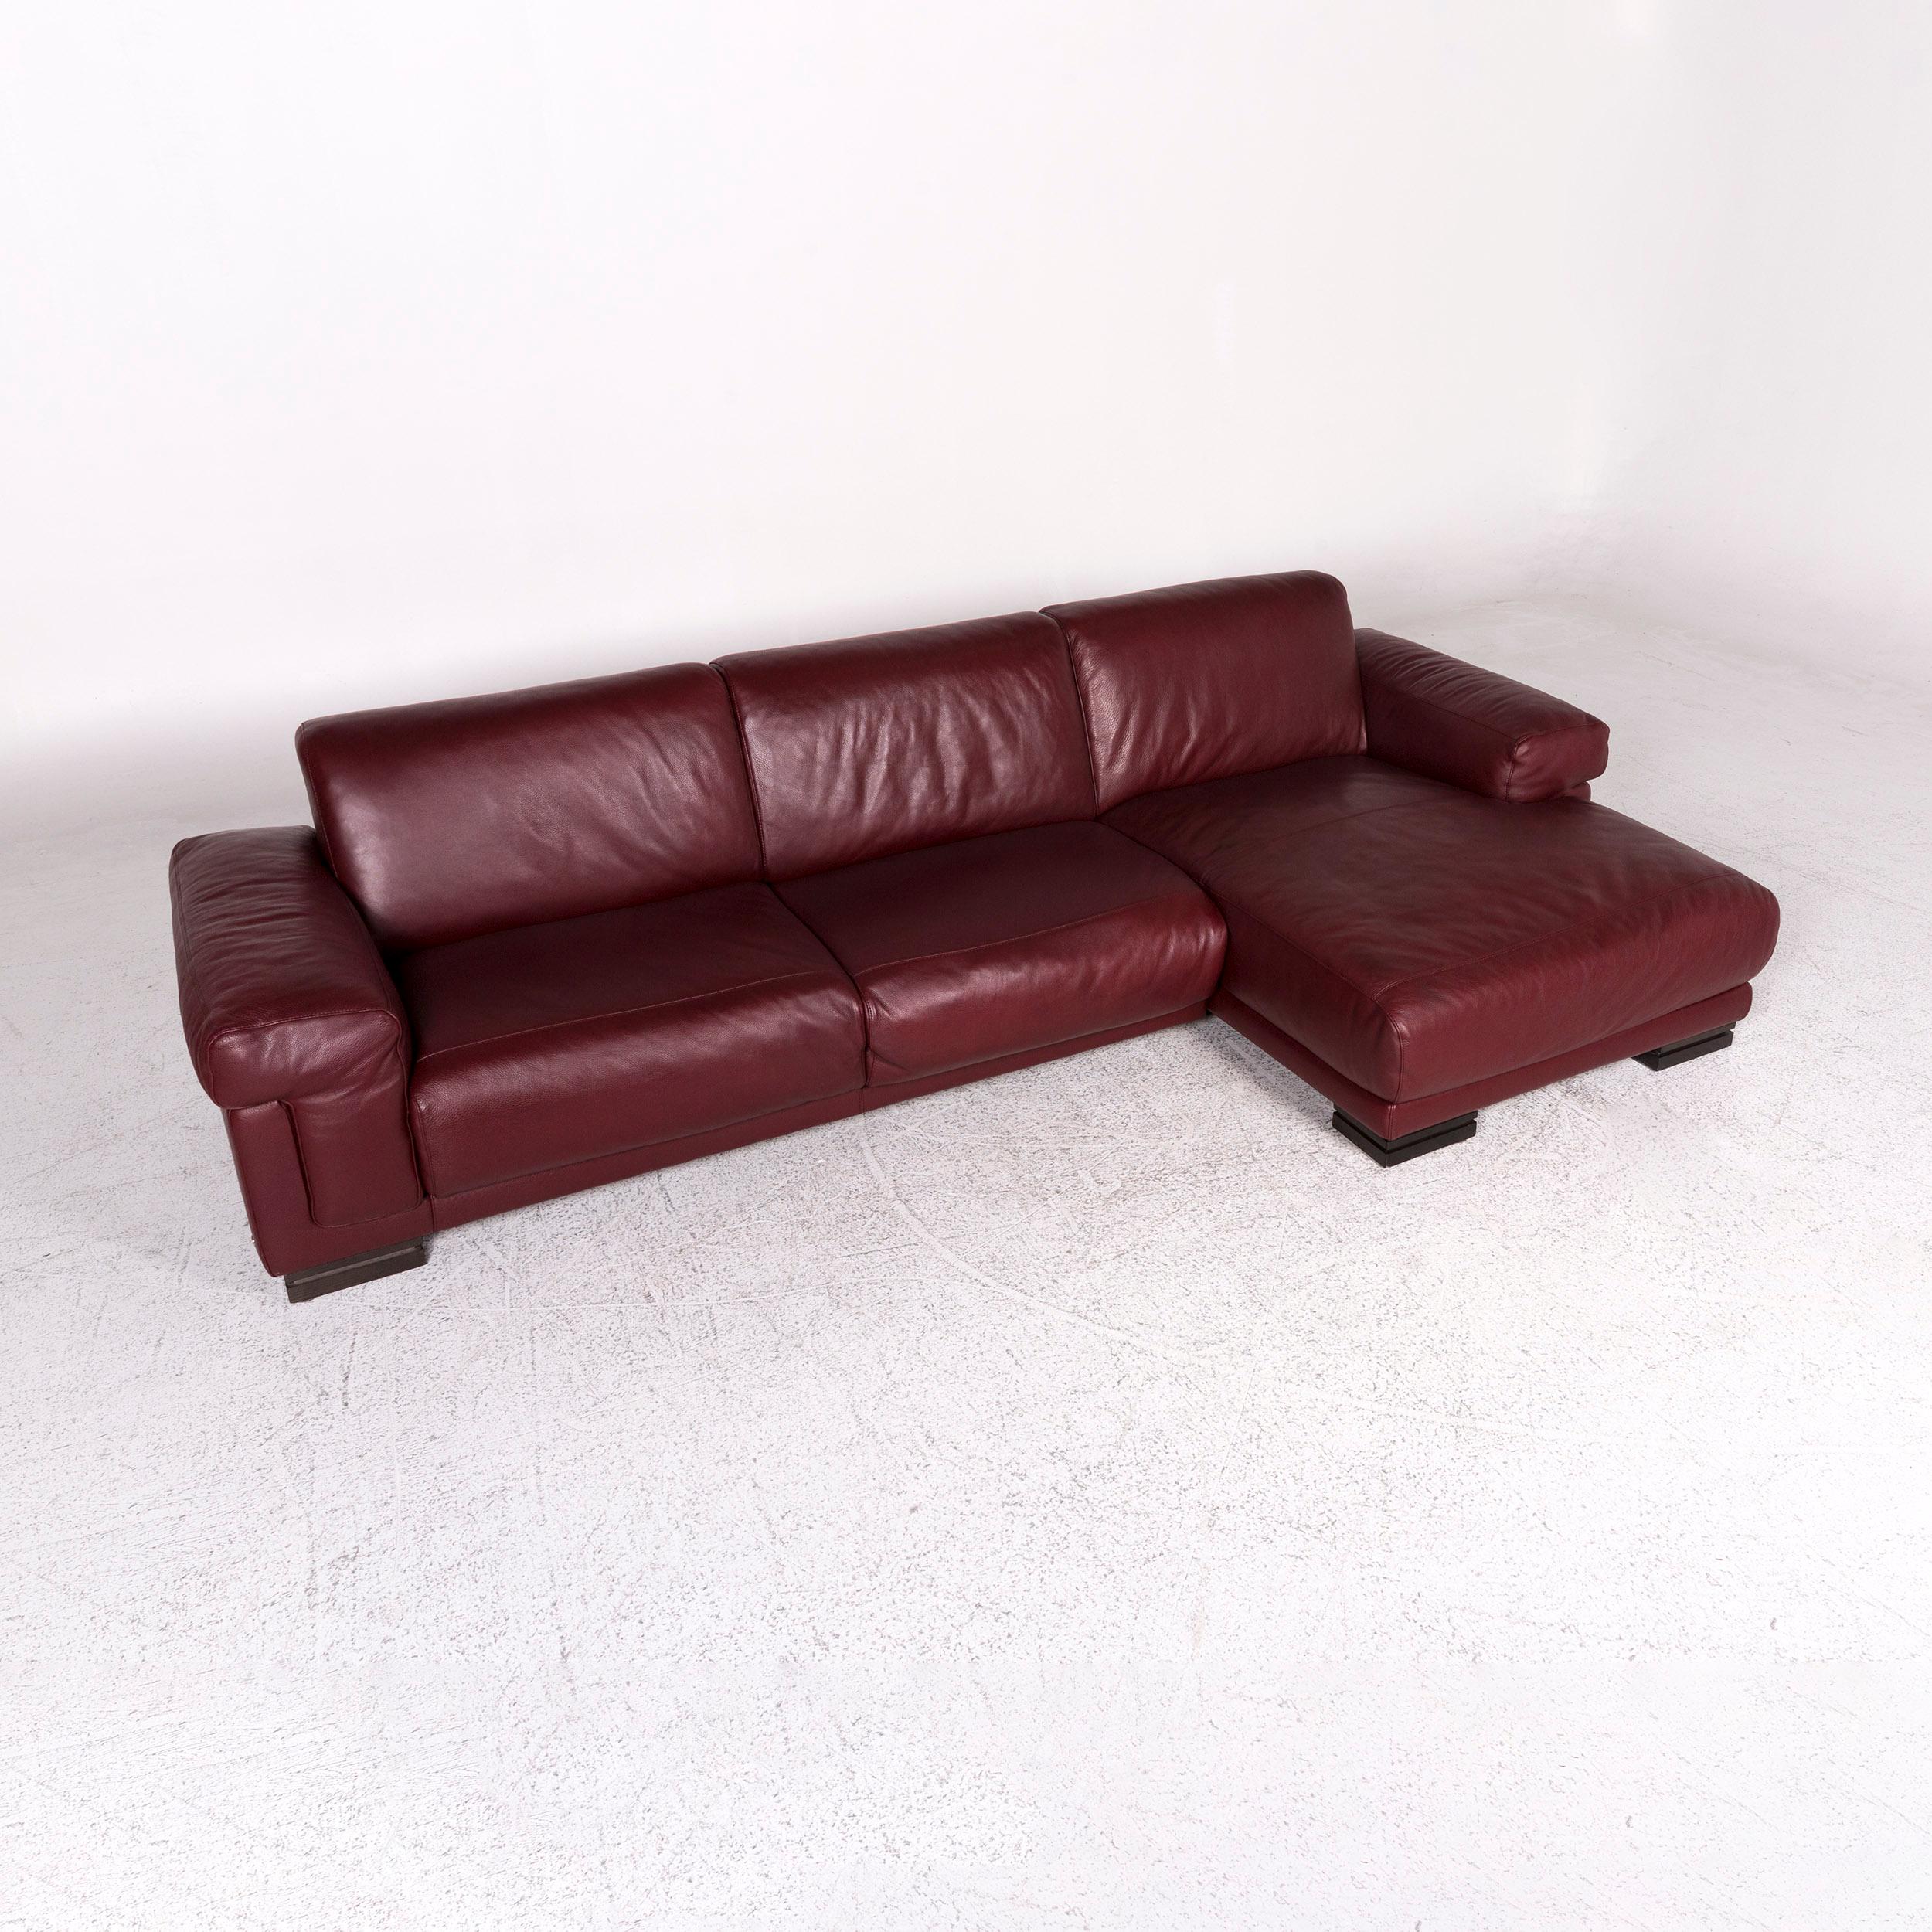 We bring to you a Natuzzi leather corner sofa Bordeaux red sofa couch.

Product measurements in centimeters:

Depth 101
Width 323
Height 95
Seat-height 46
Rest-height 63
Seat-depth 62
Seat-width 253
Back-height 41.

                